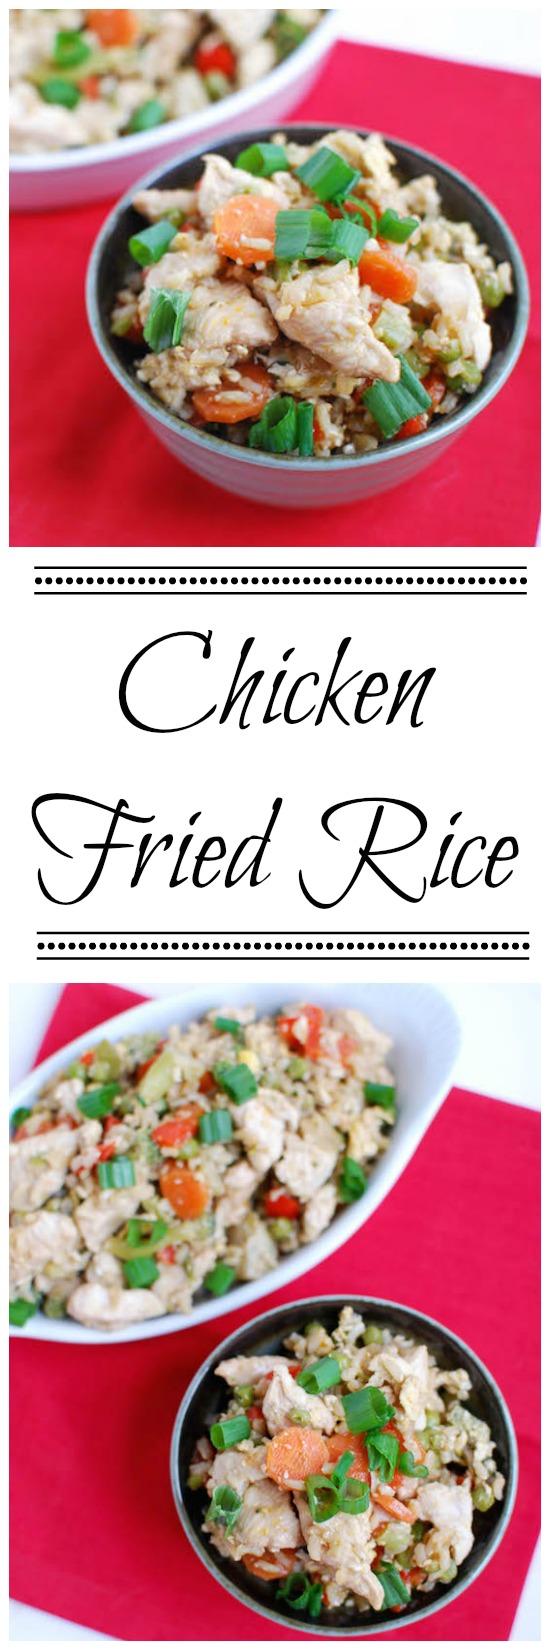 This Healthy Chicken Fried Rice is perfect for nights when you want a quick, easy dinner that's both simple and nutritious!